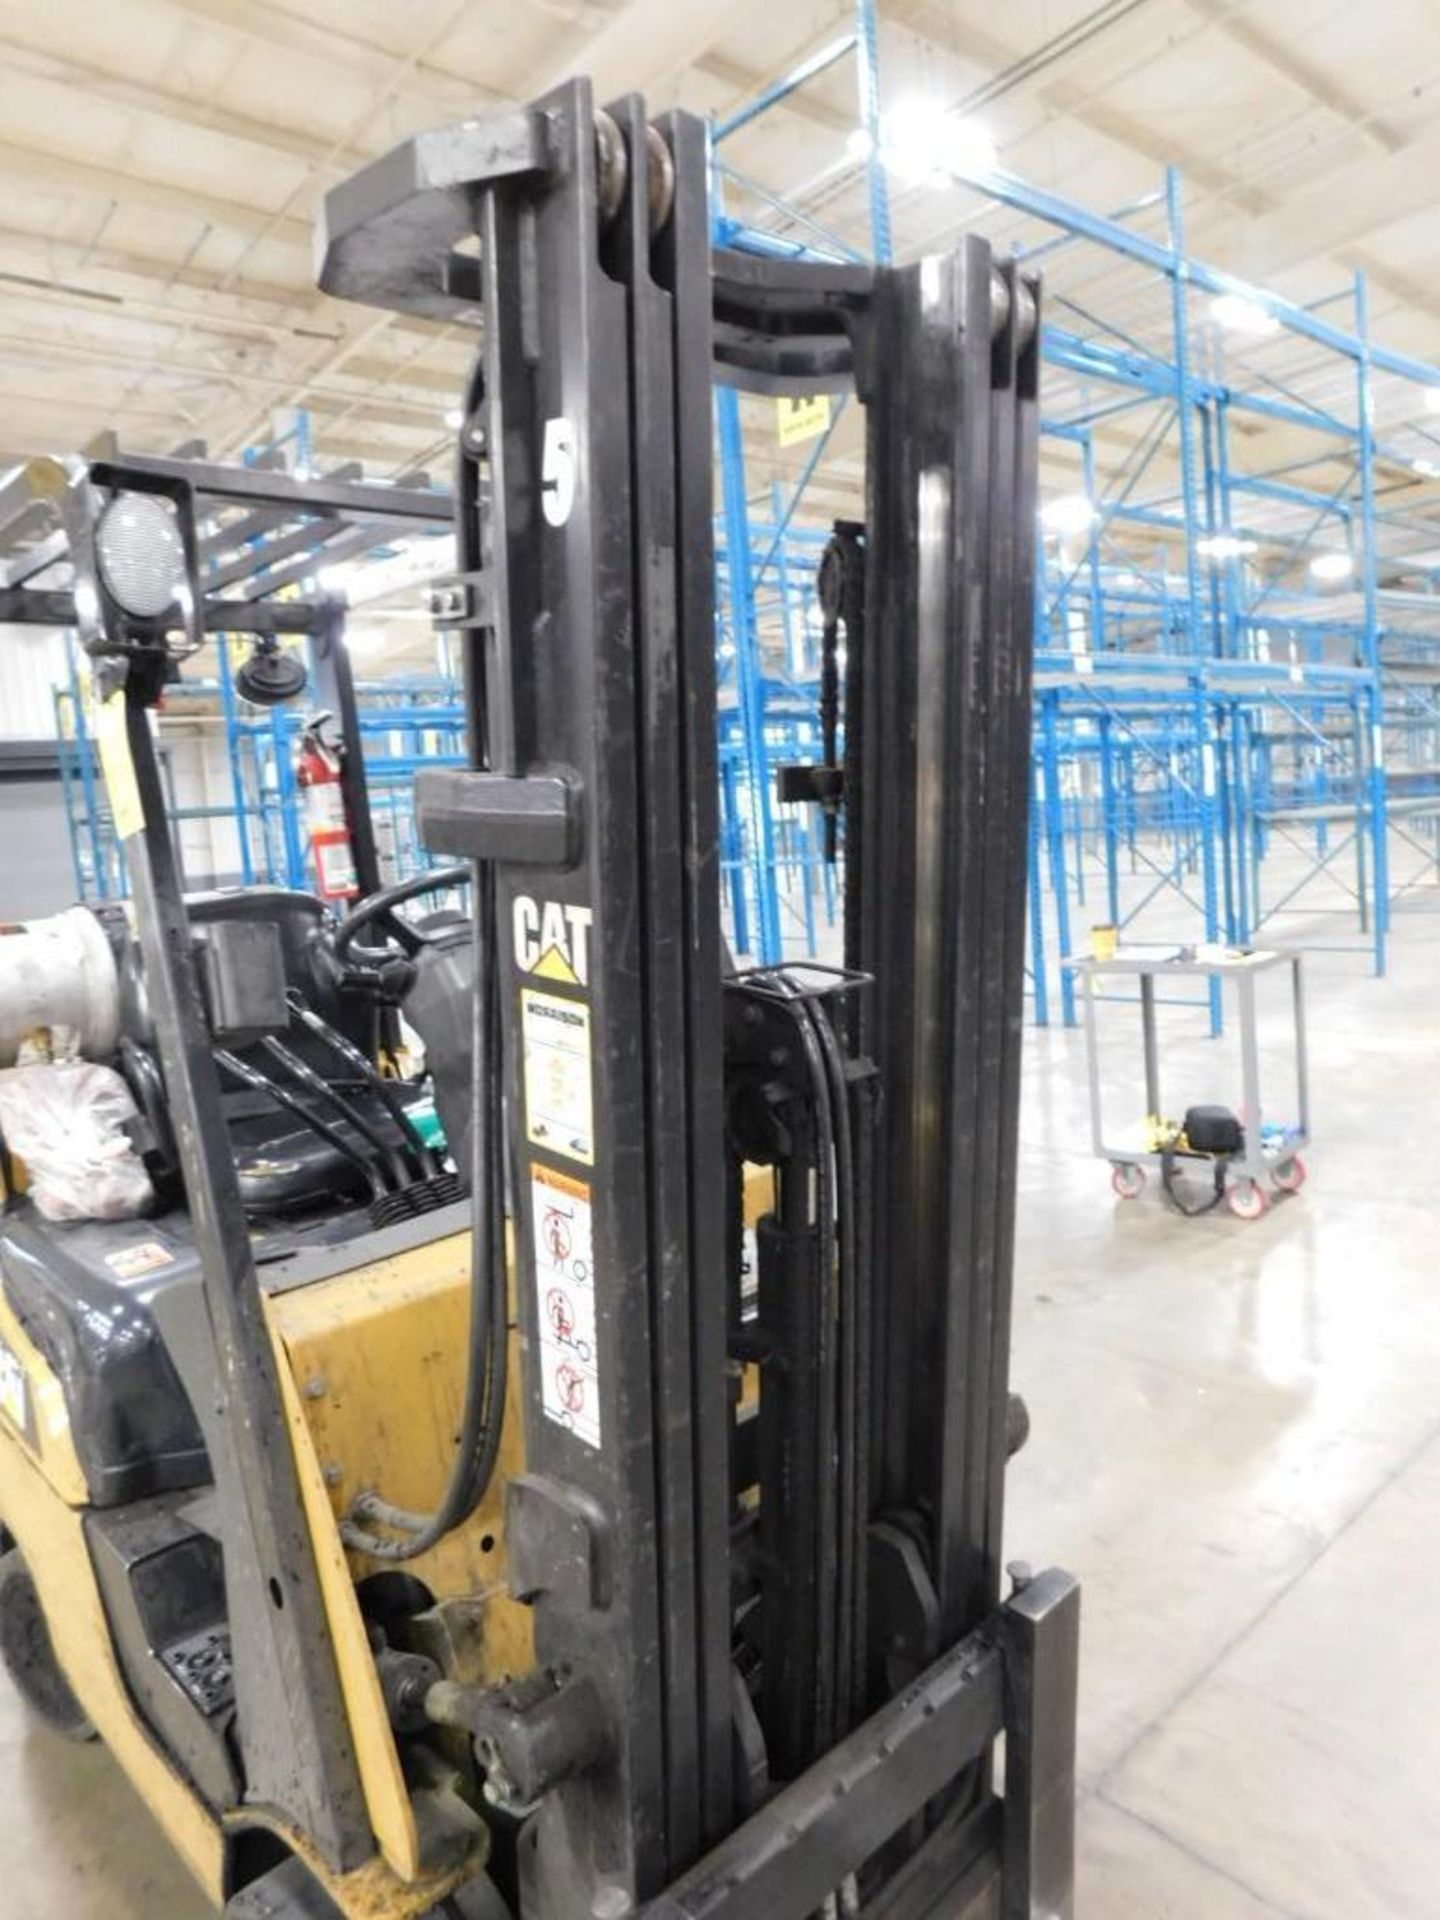 Caterpillar 2C3000 Fork Lift Truck, 6380 Lb. Max. Load Capacity, Overhead Guard, 3- Stage Mast, 187" - Image 6 of 9